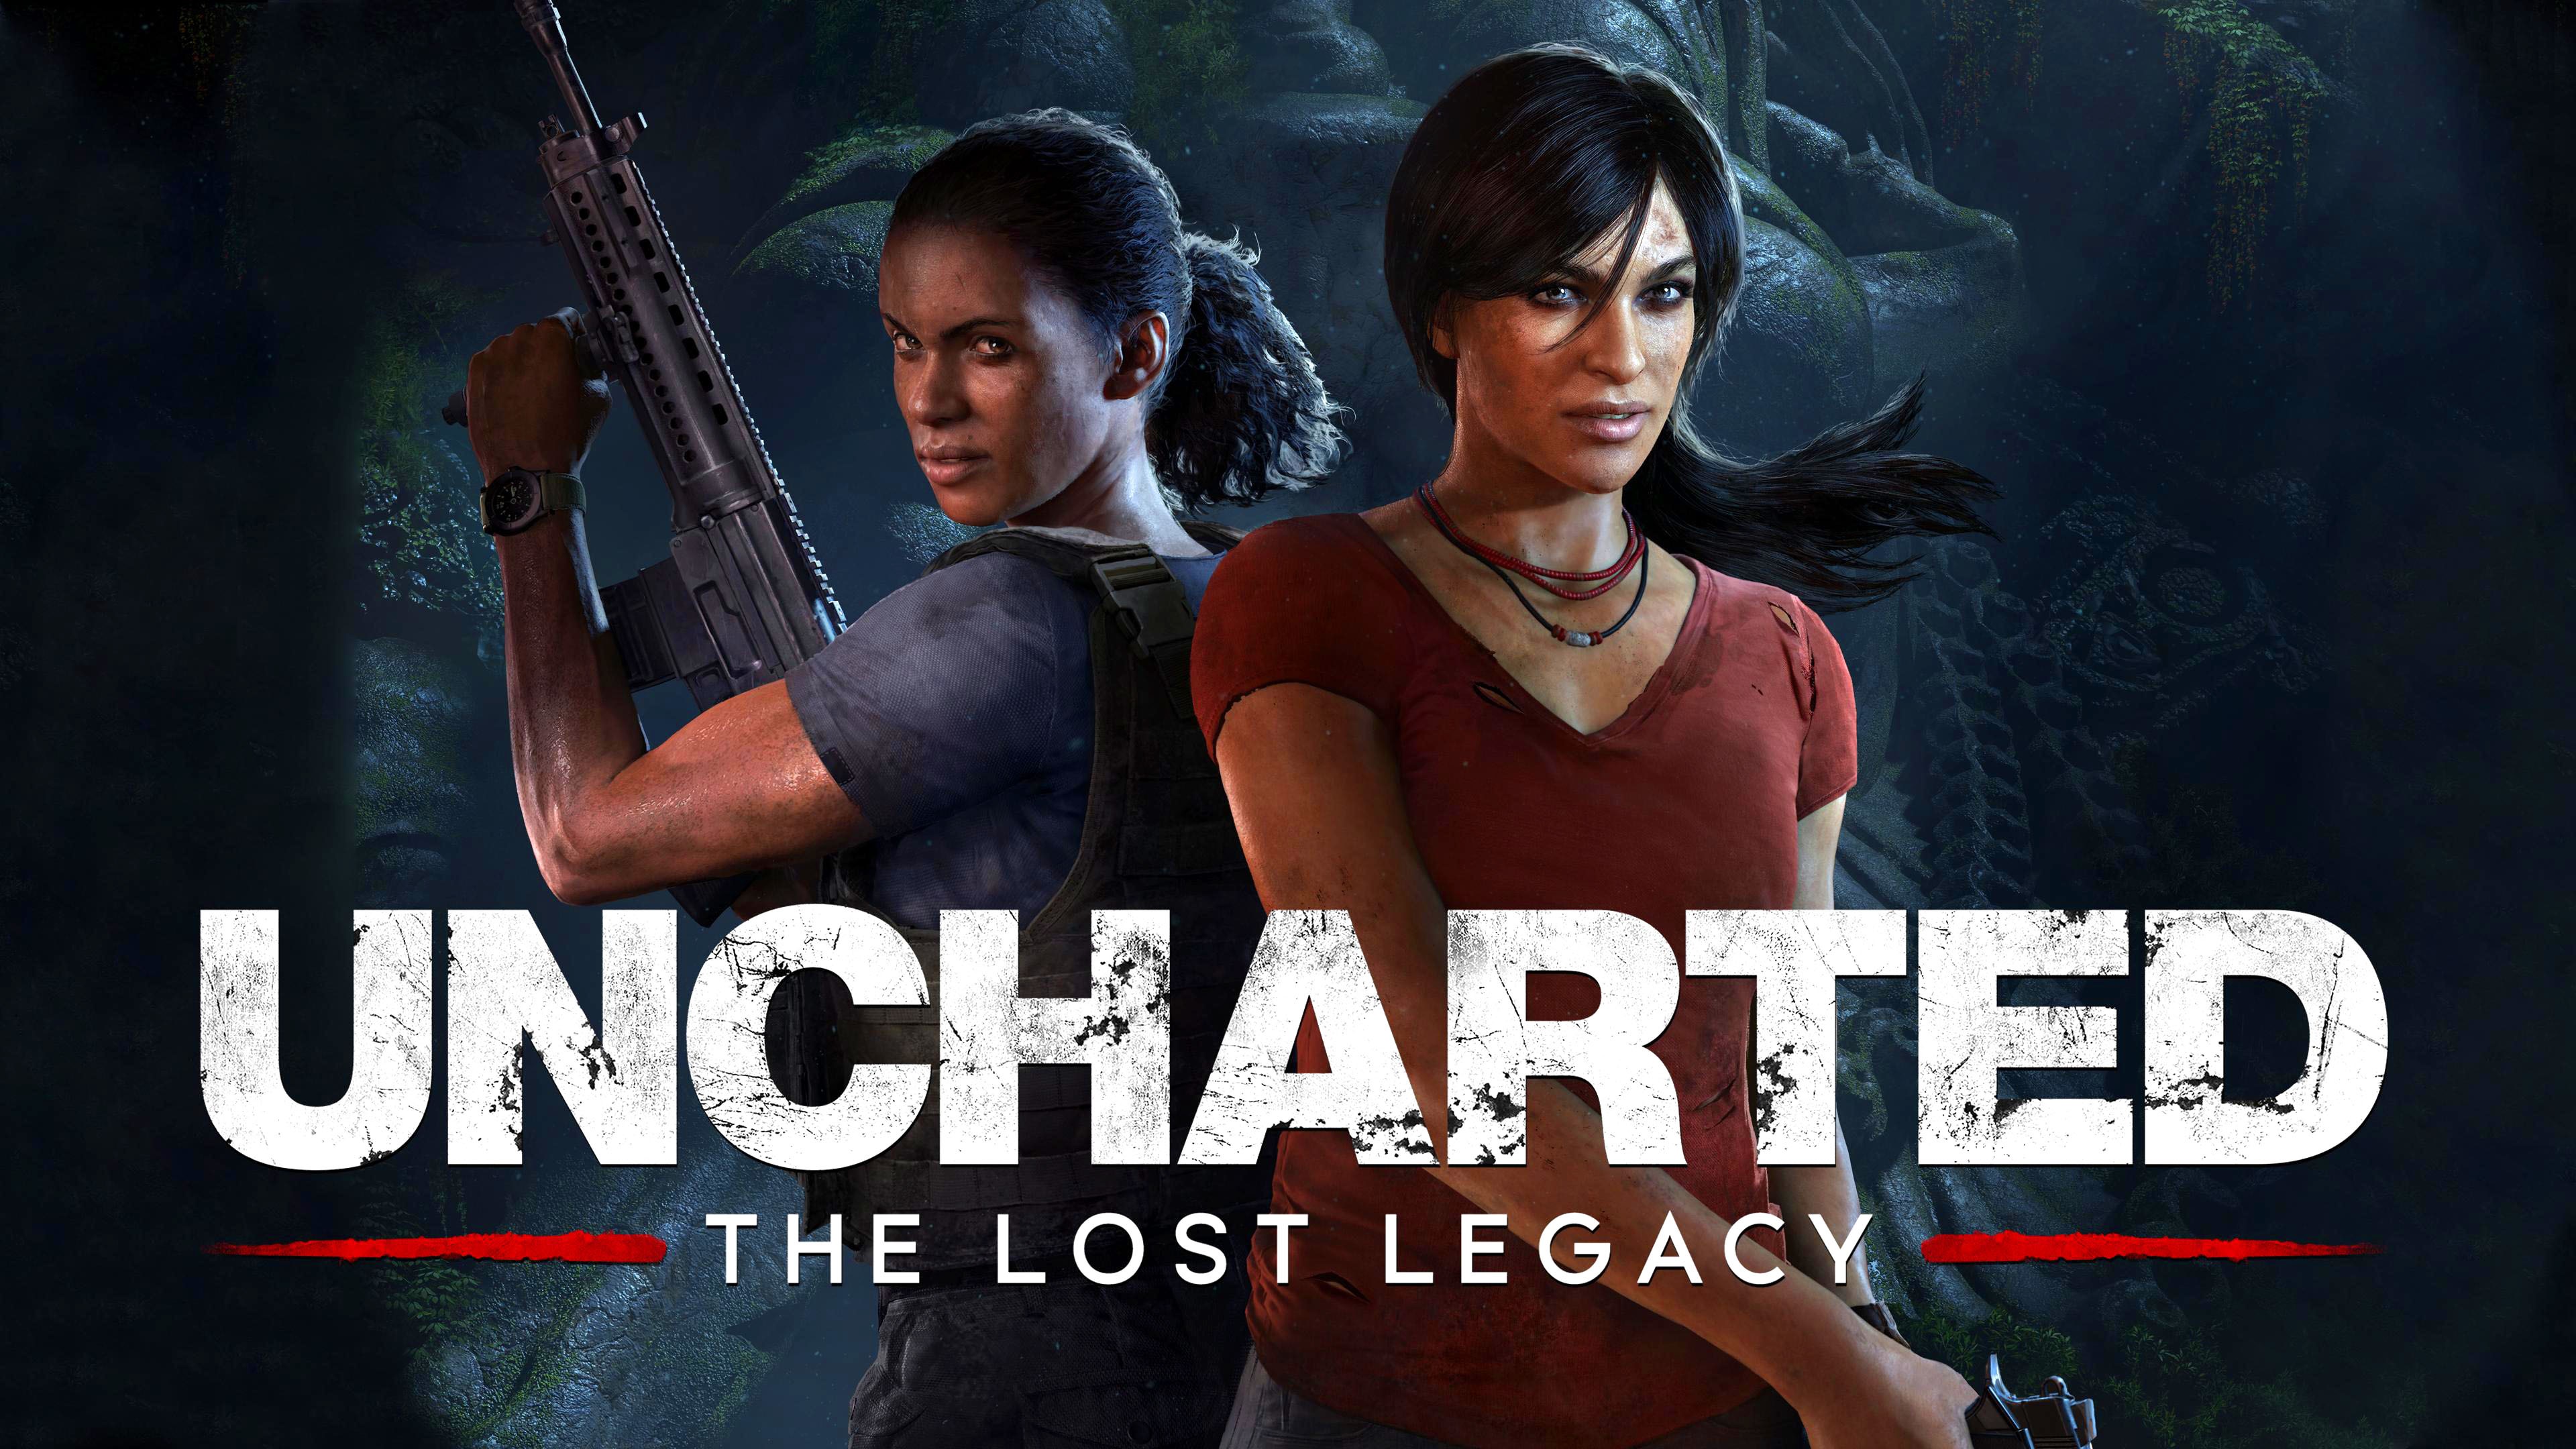 Full HD 1080p Uncharted The Lost Legacy wallpapers free download